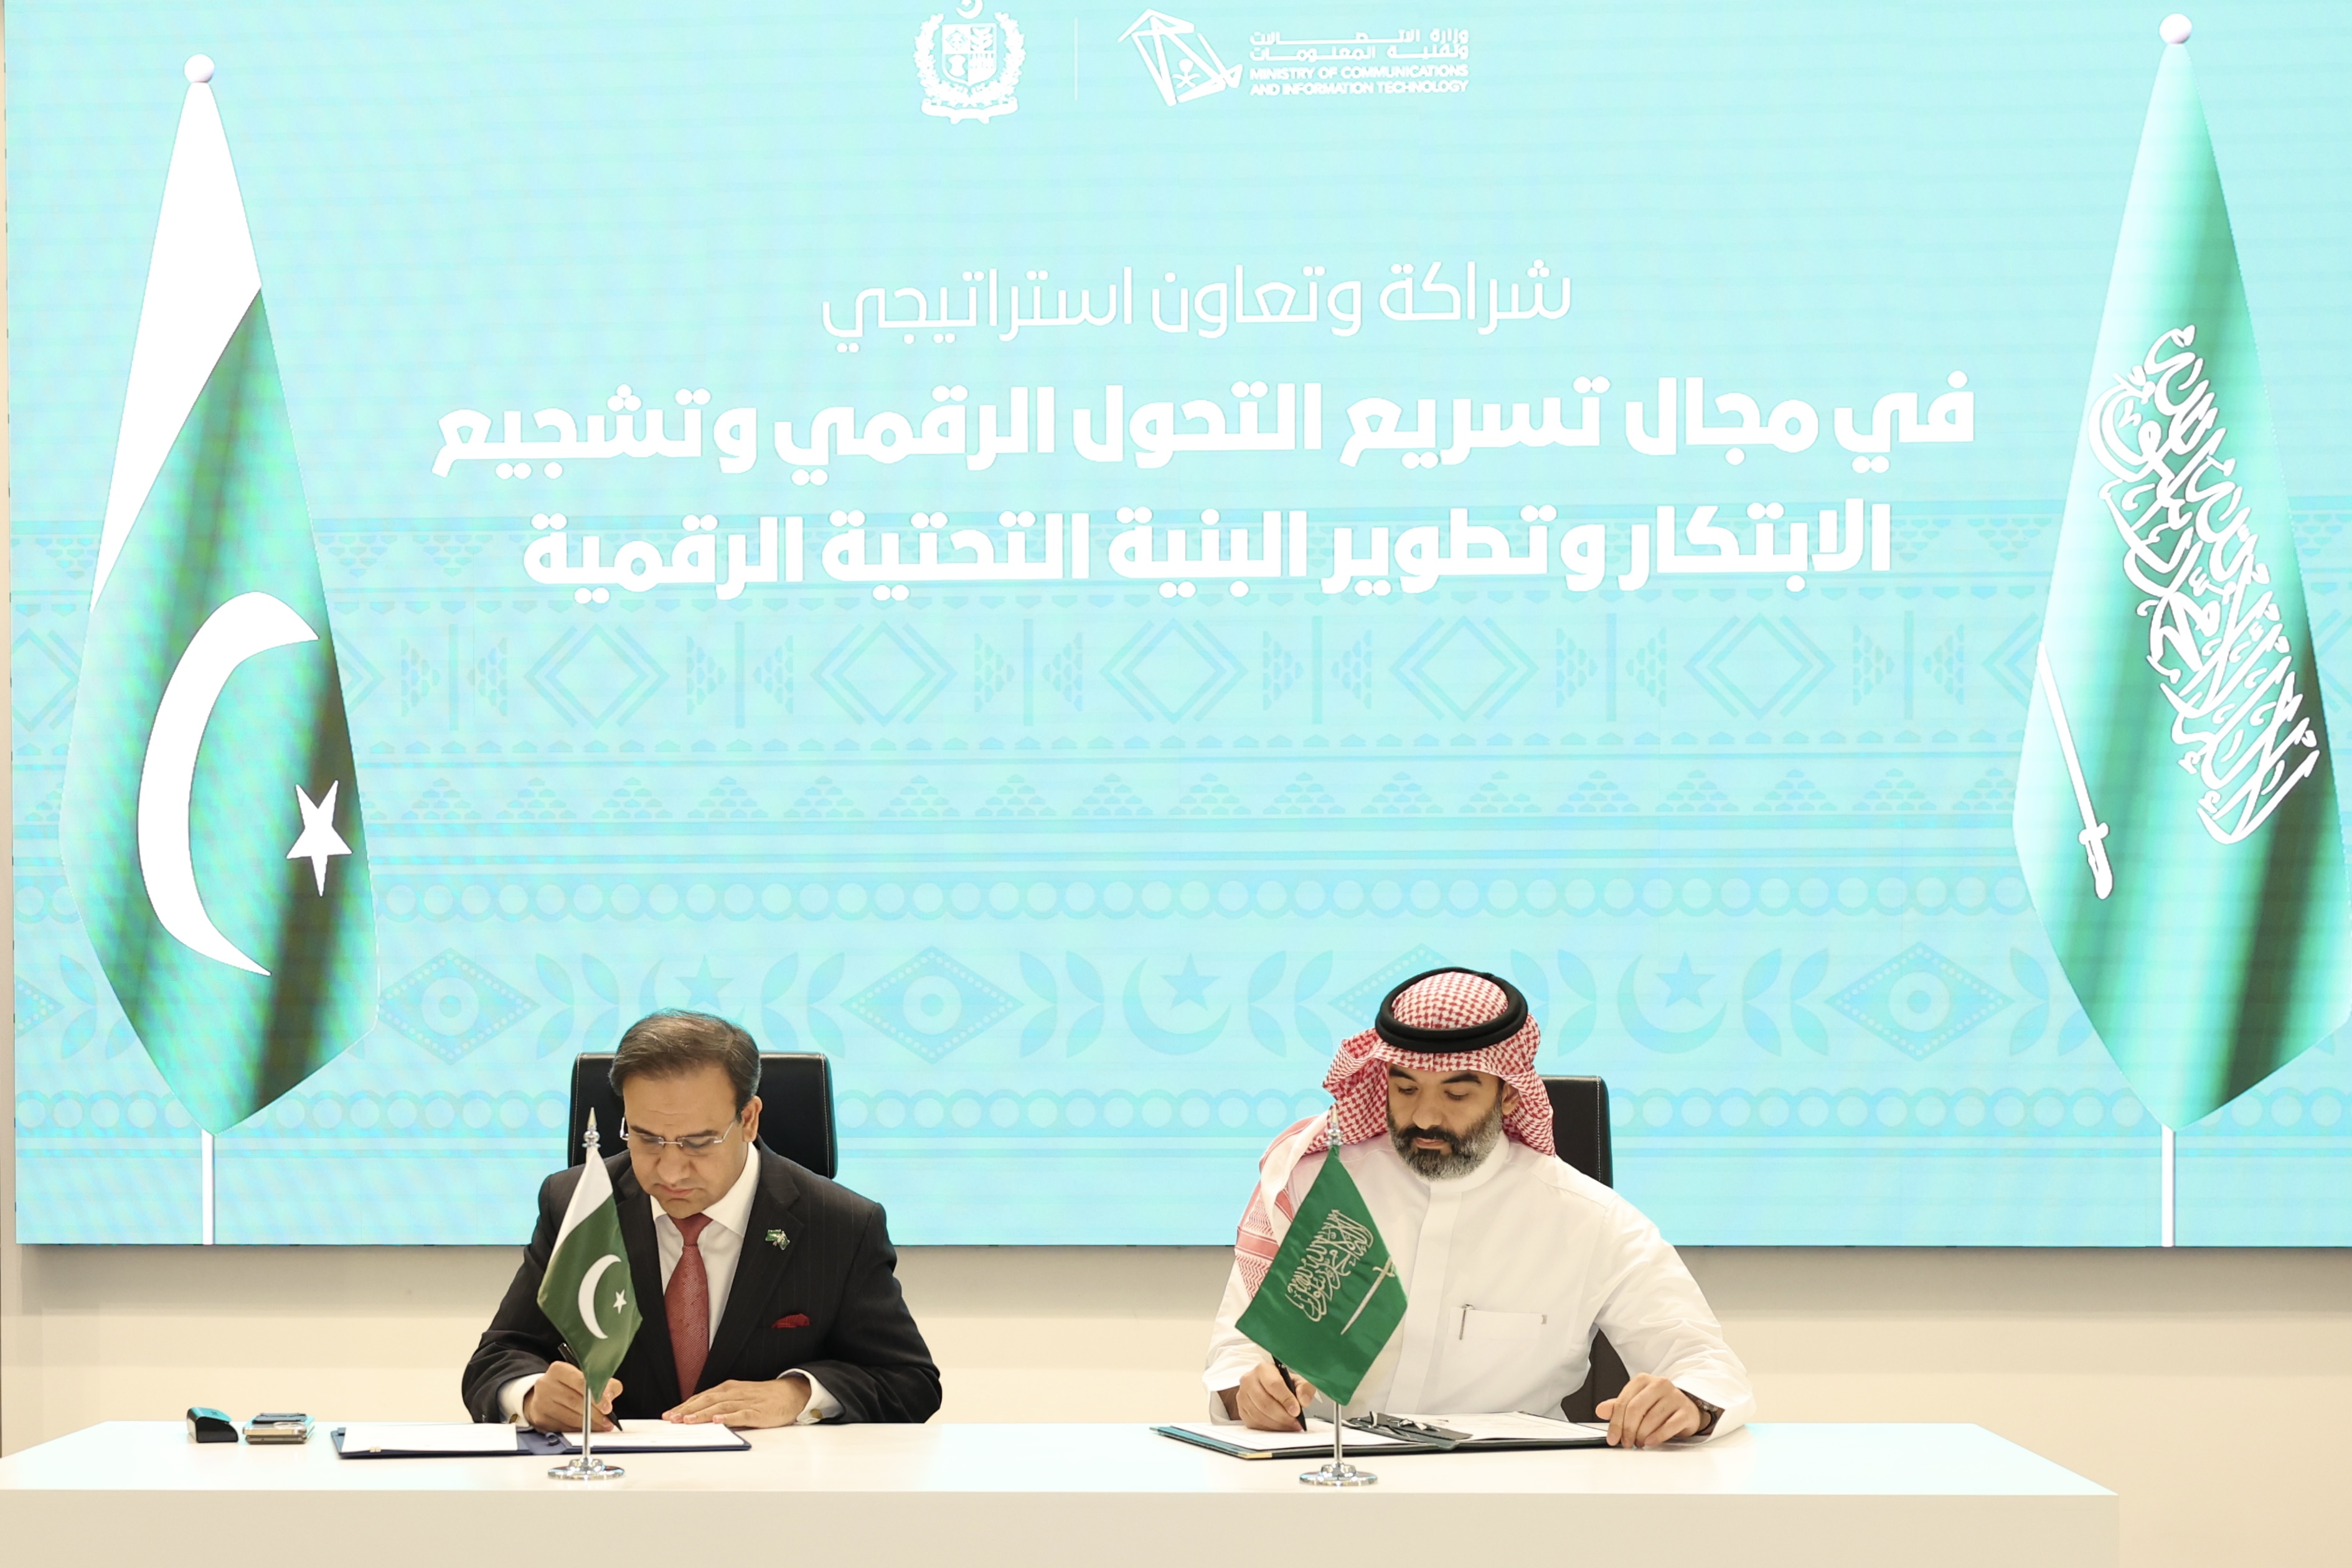 Saudi Arabia and Pakistan Sign MoU to Accelerate Digital Transformation and Innovation